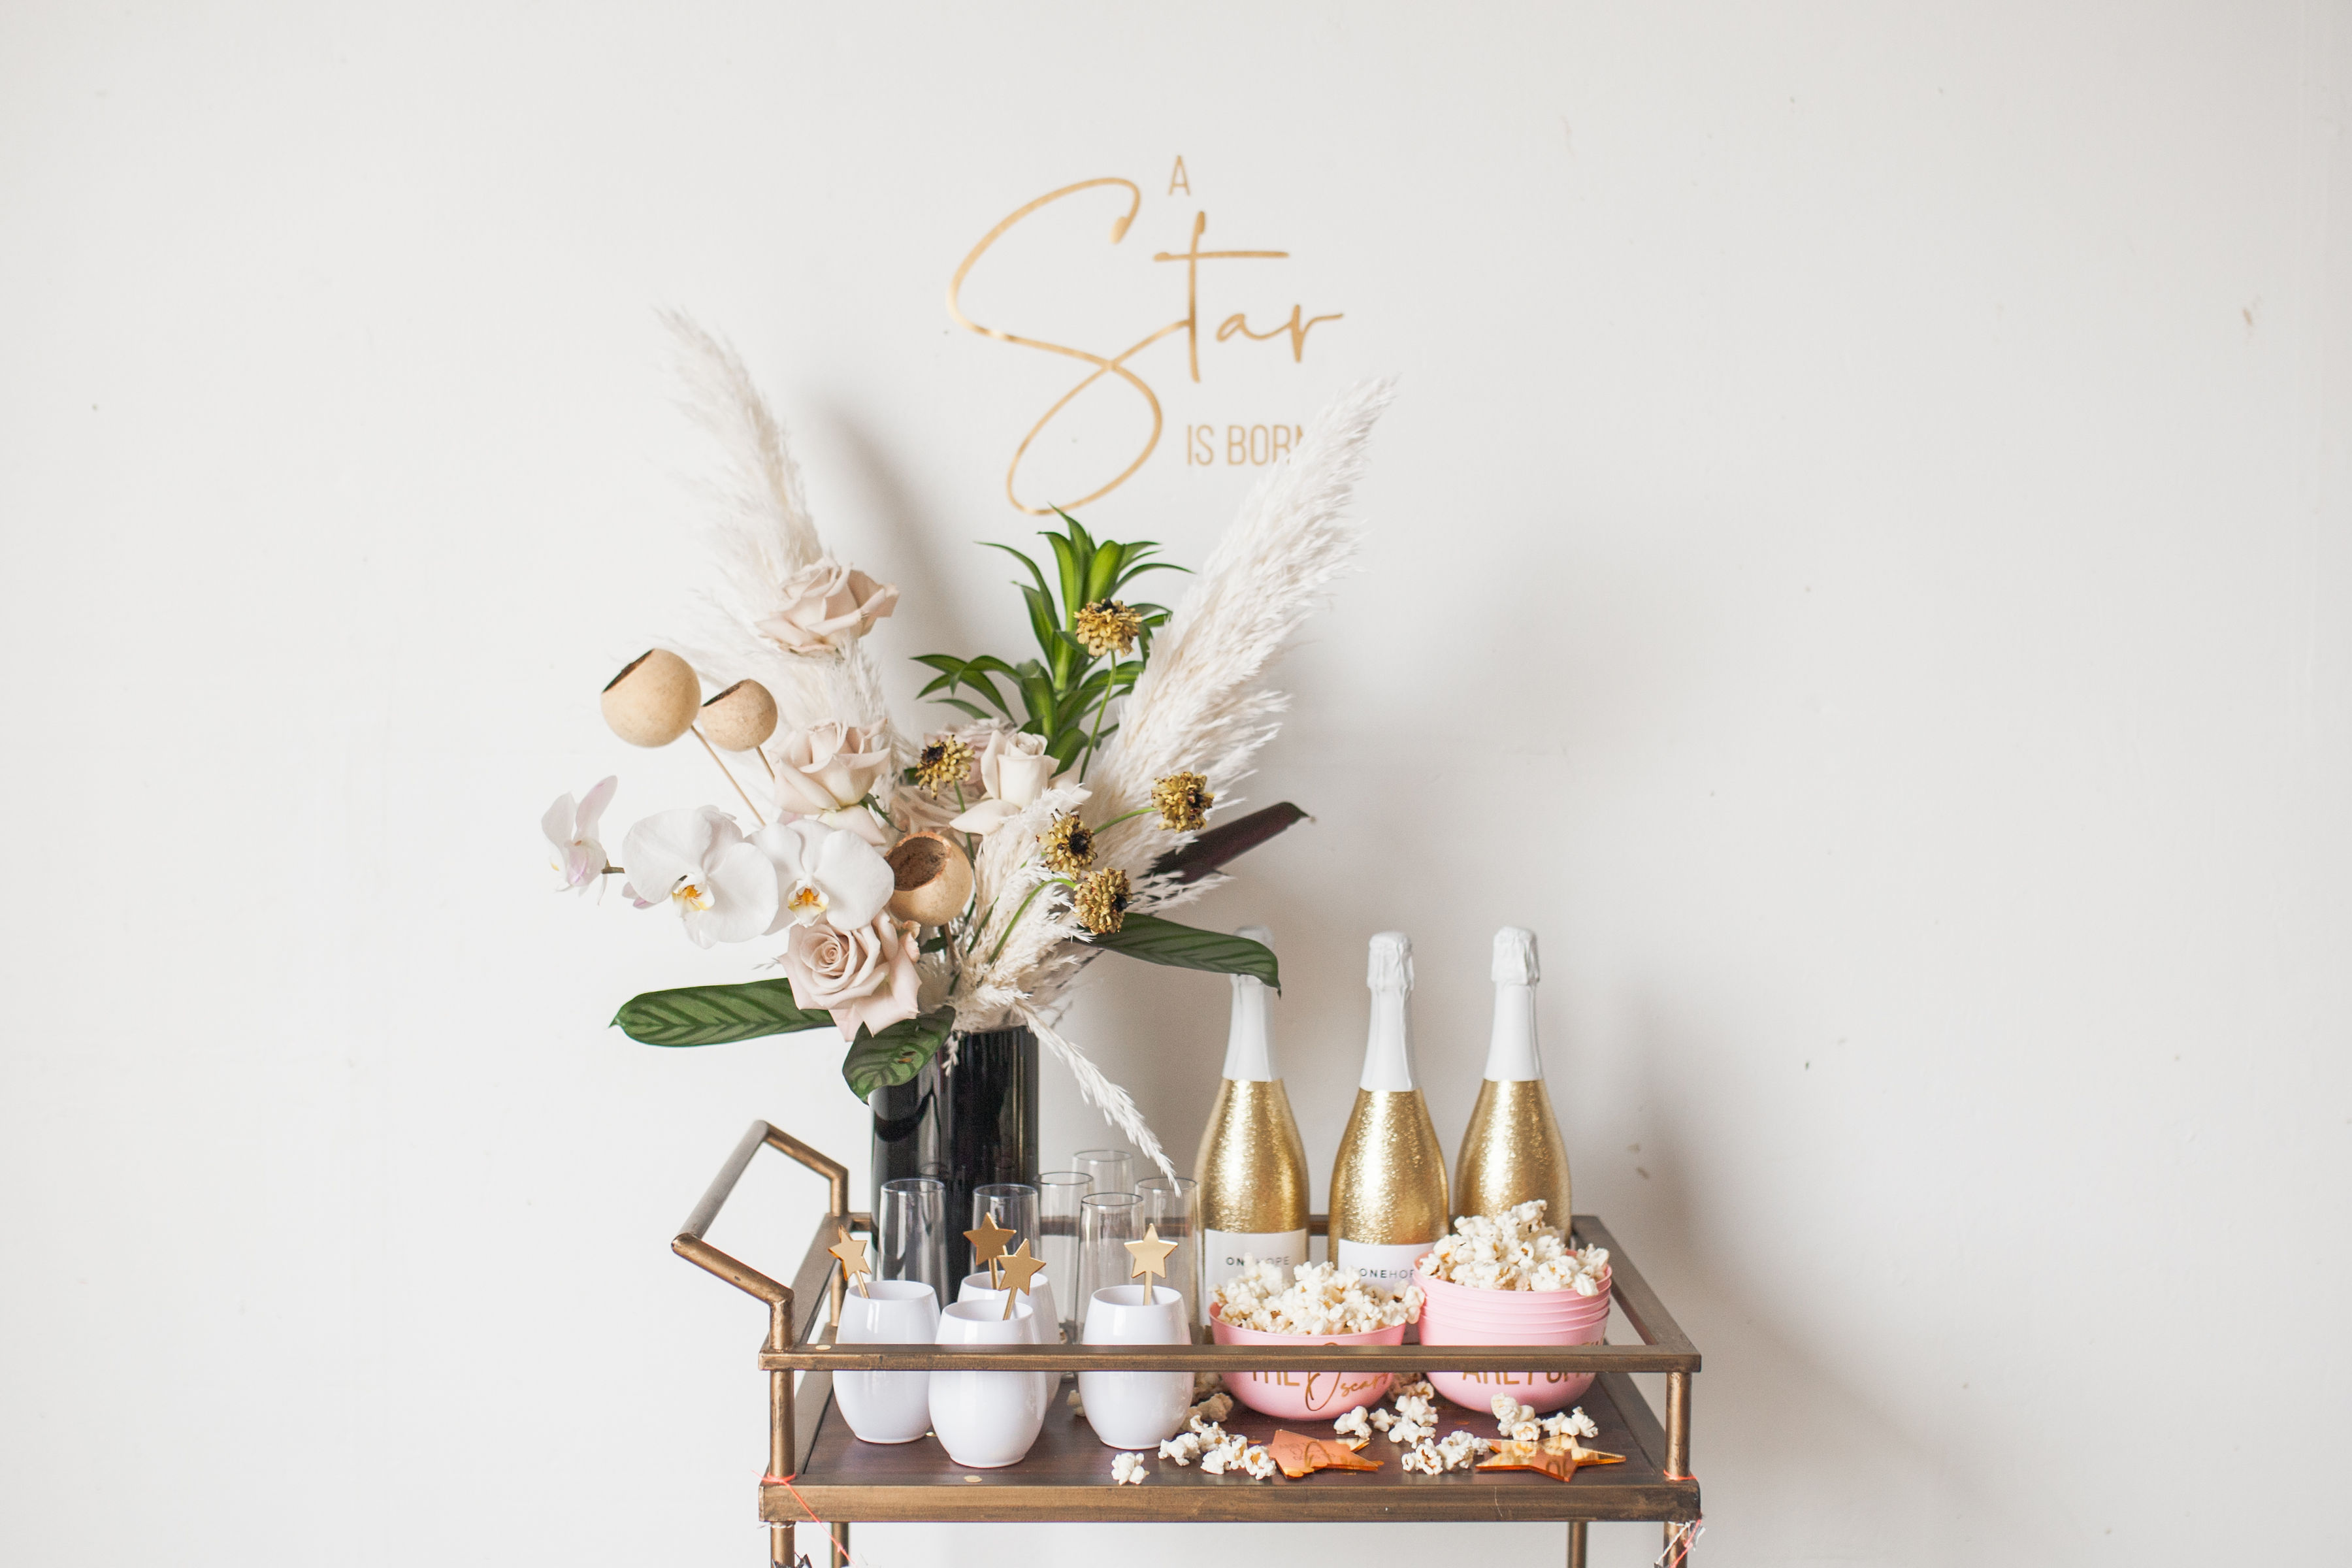 Cheers to the Oscars with this Styled Bar Cart!